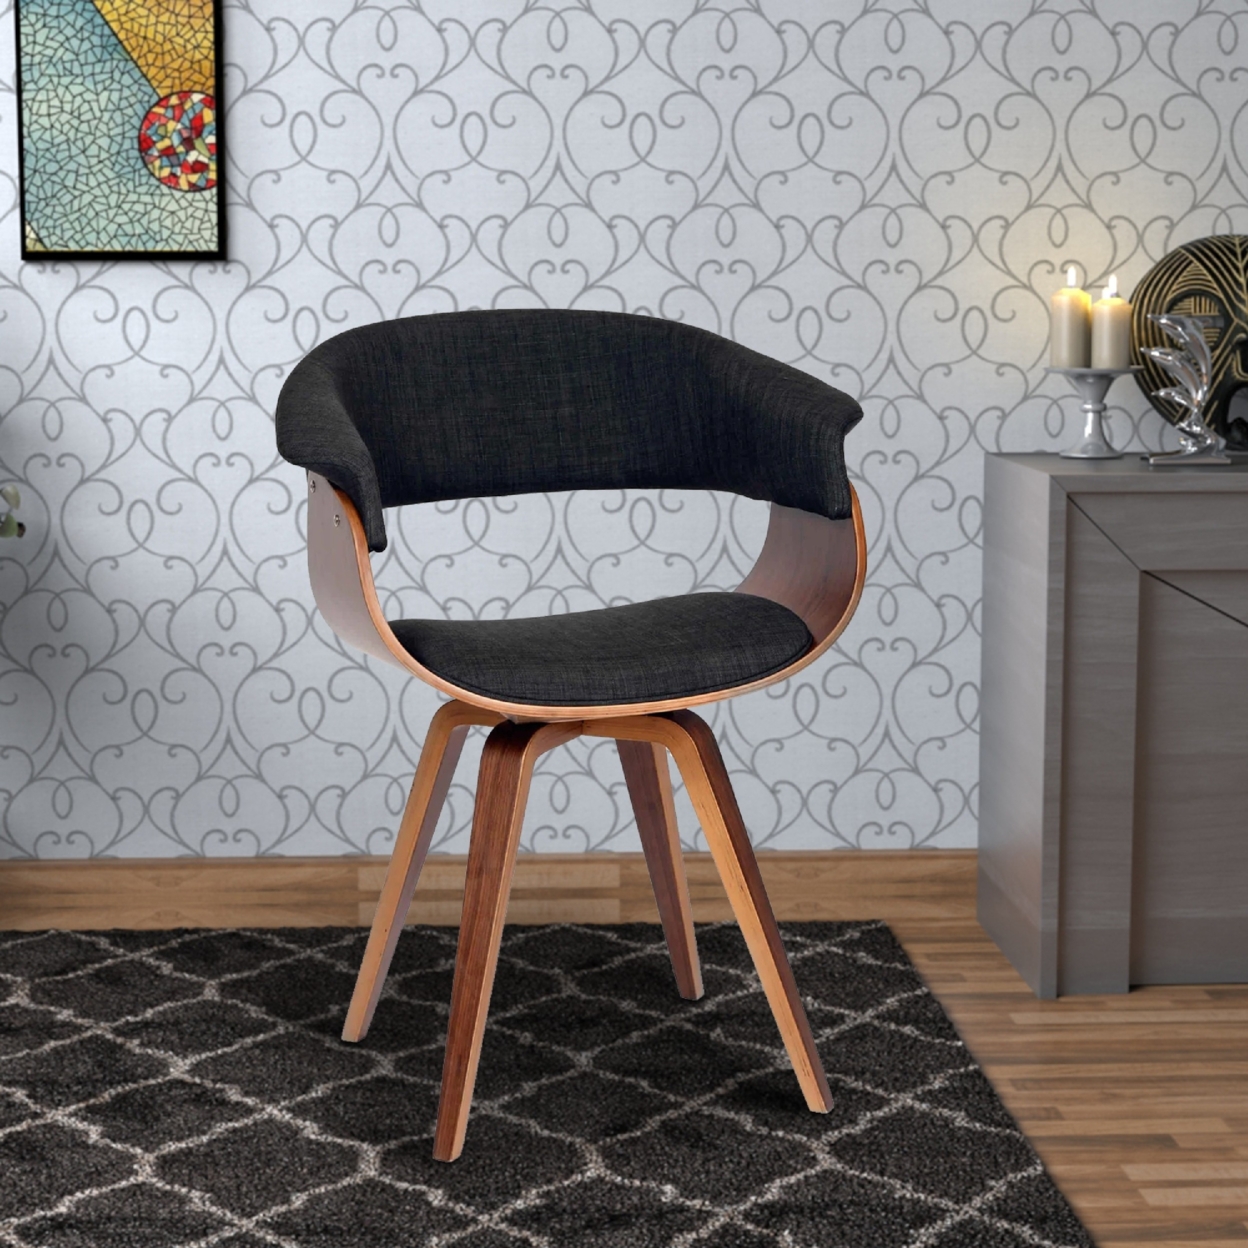 Fabric Padded Curved Seat Chair With Angled Wooden Legs, Charcoal Gray- Saltoro Sherpi